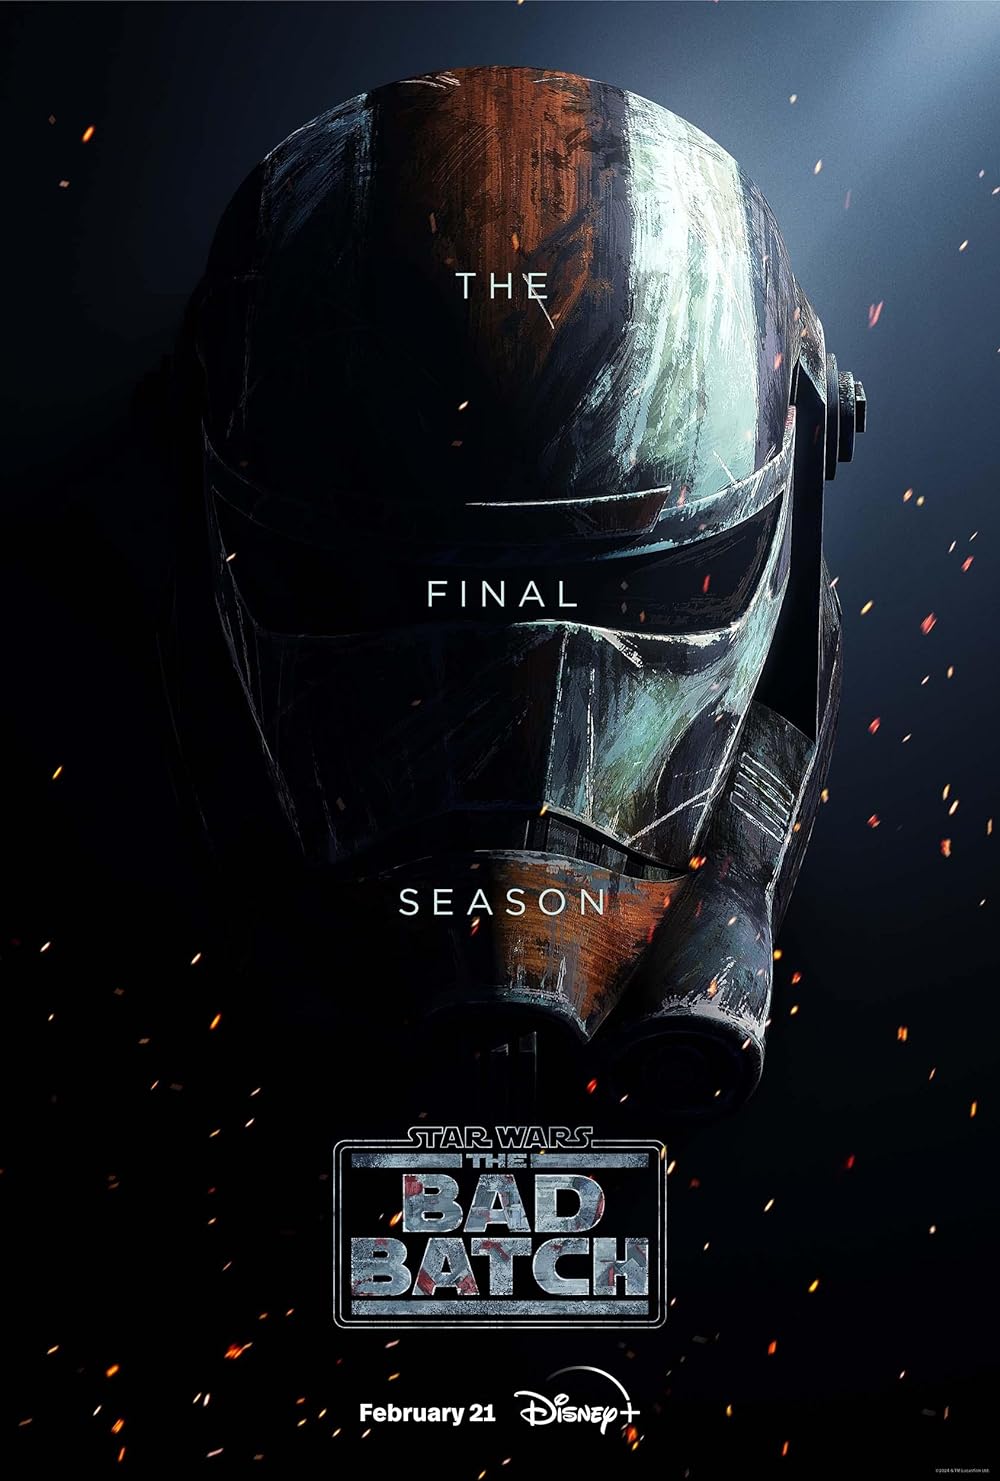 Star Wars: The Bad Batch season 3 (February 21) - Streaming on Disney+ HotstarThe final chapter in the saga of Clone Force 99 delves deeper into the dark era of the Galactic Empire’s rise. After a somber conclusion to season 2, the team is scattered, grappling with personal losses and the capture of Omega. In this new adventure, they embark on a journey of redemption, resilience, and rebellion as the team seeks unexpected allies to rescue Omega and thwart the Empire’s sinister cloning experiments.